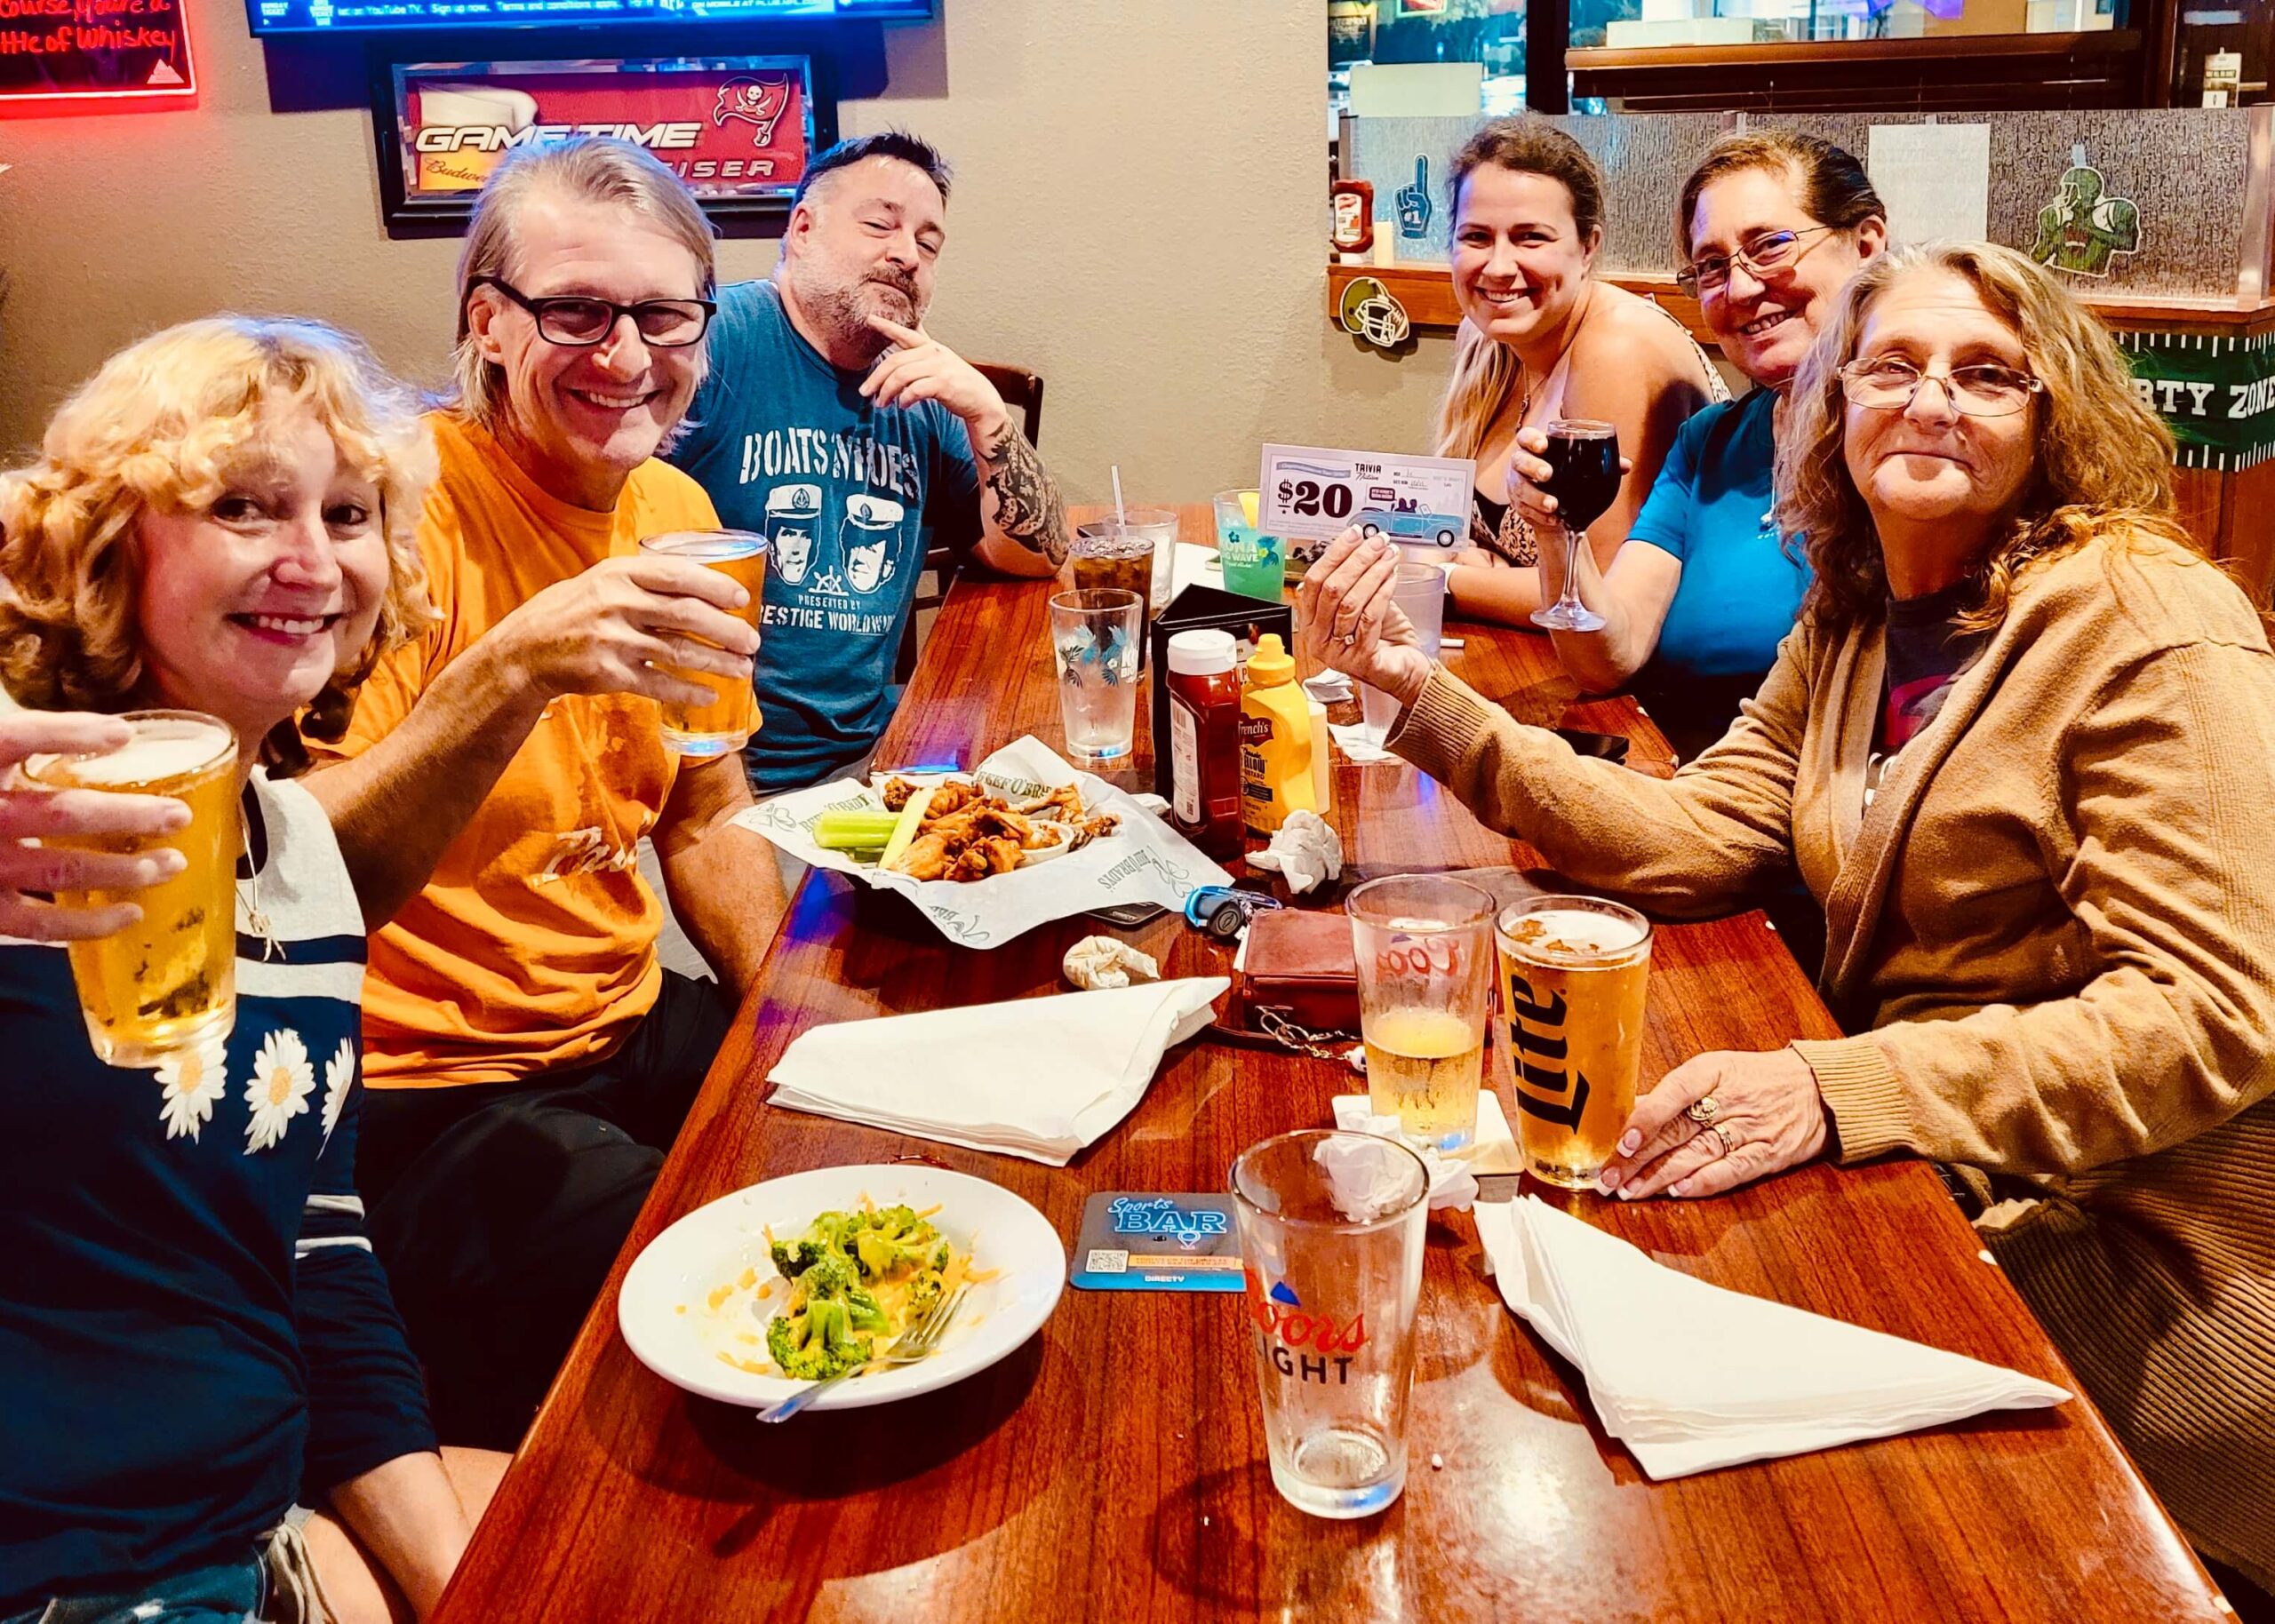 Beef 'O' Brady's Bartow FL 33830 trivia night: group of six adults gathered around a table smiling with wings and broccoli on the table while they hold up glasses of beer, wine, and a $20 trivia coupon